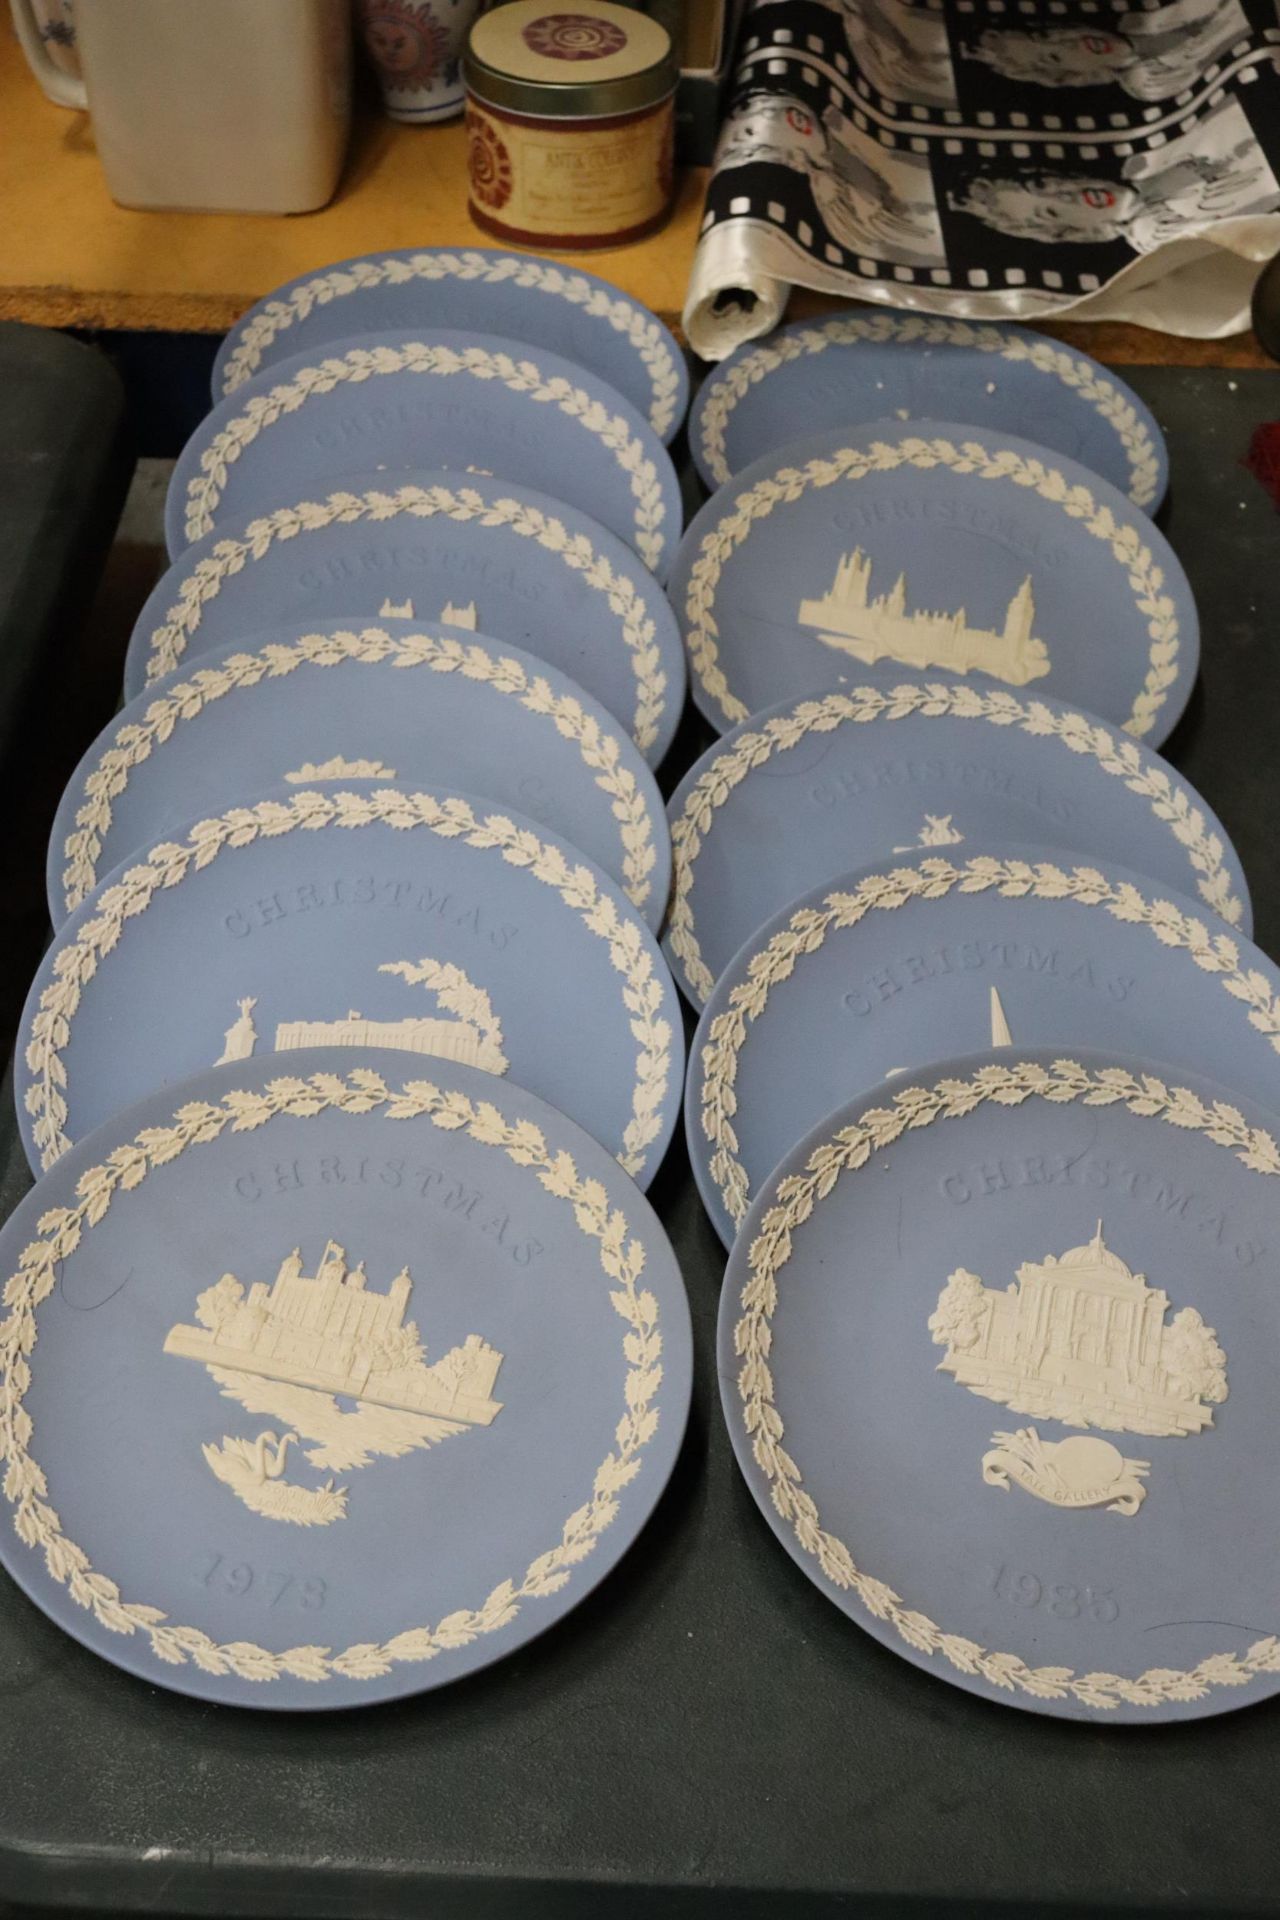 A COLLECTION OF POWDER BLUE WEDGWOOD JASPERWARE CABINET PLATES PLUS STANDS - 11 IN TOTAL